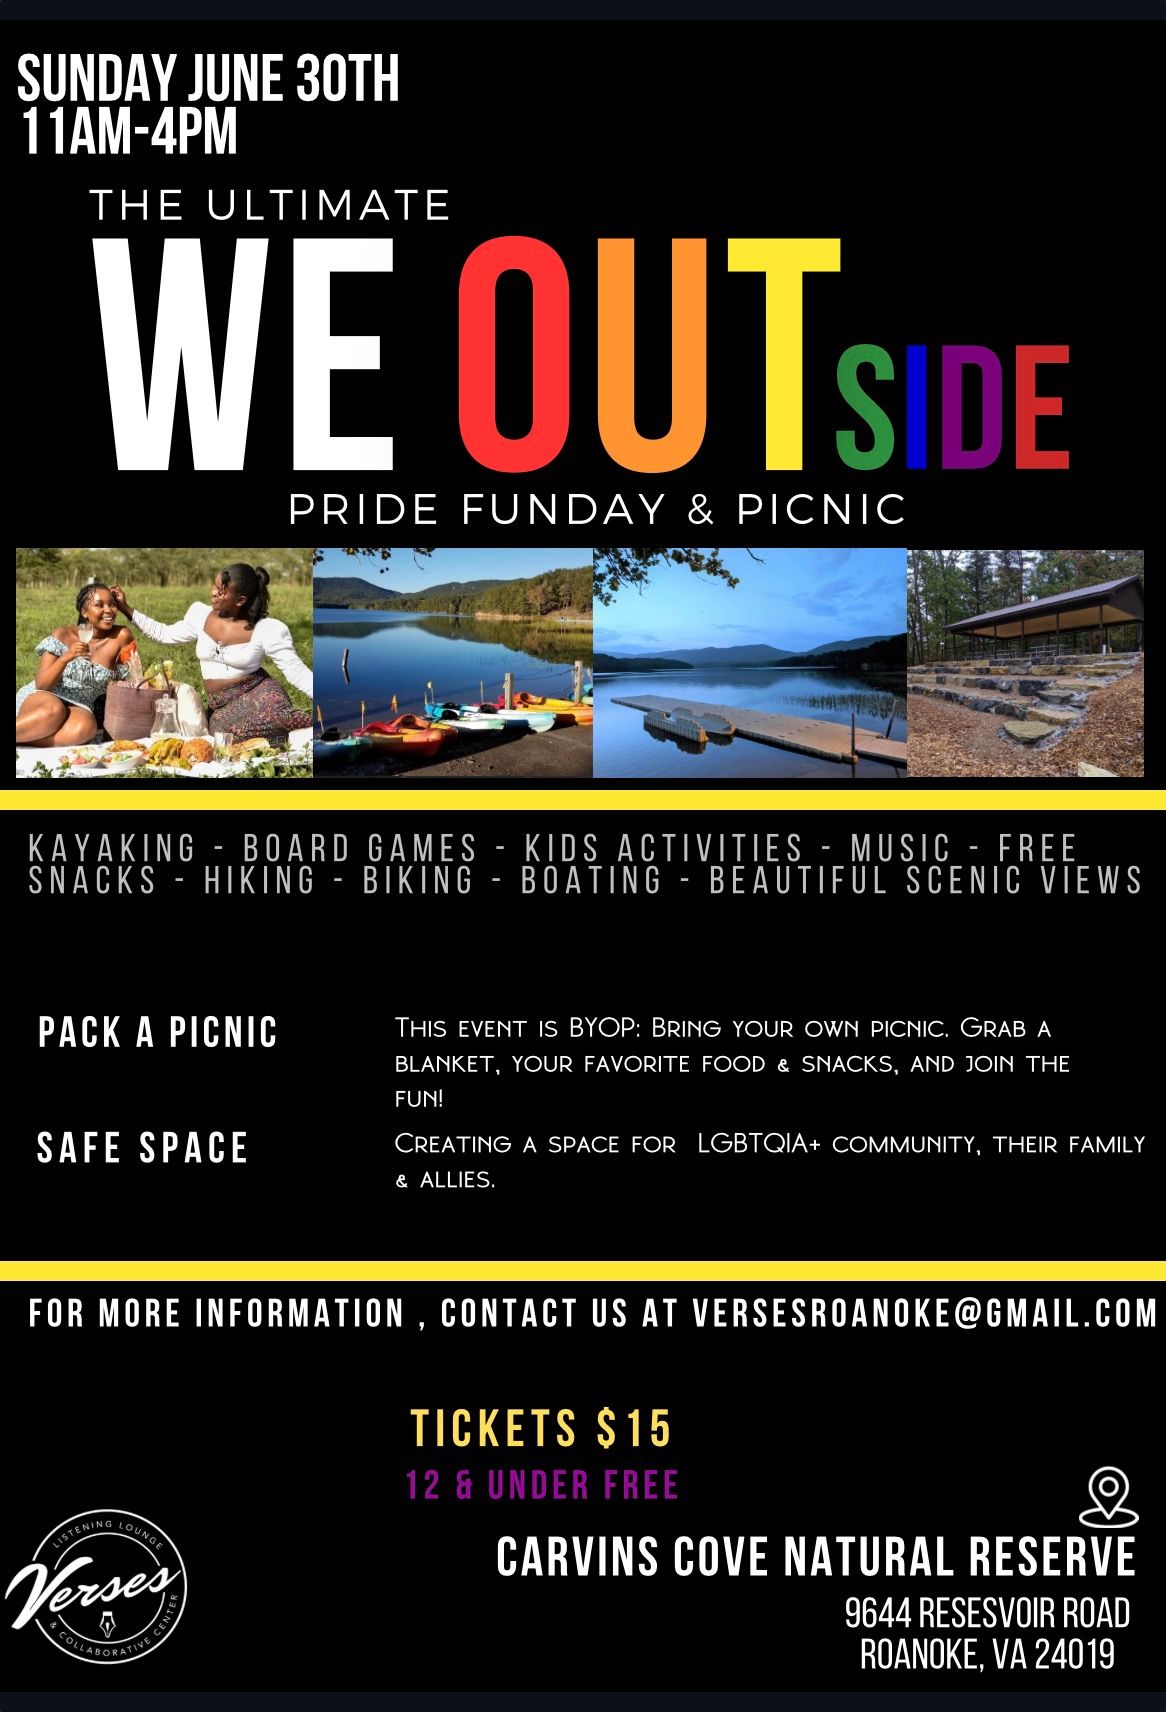 The Ultimate We OUTside Pride Funday & Picnic